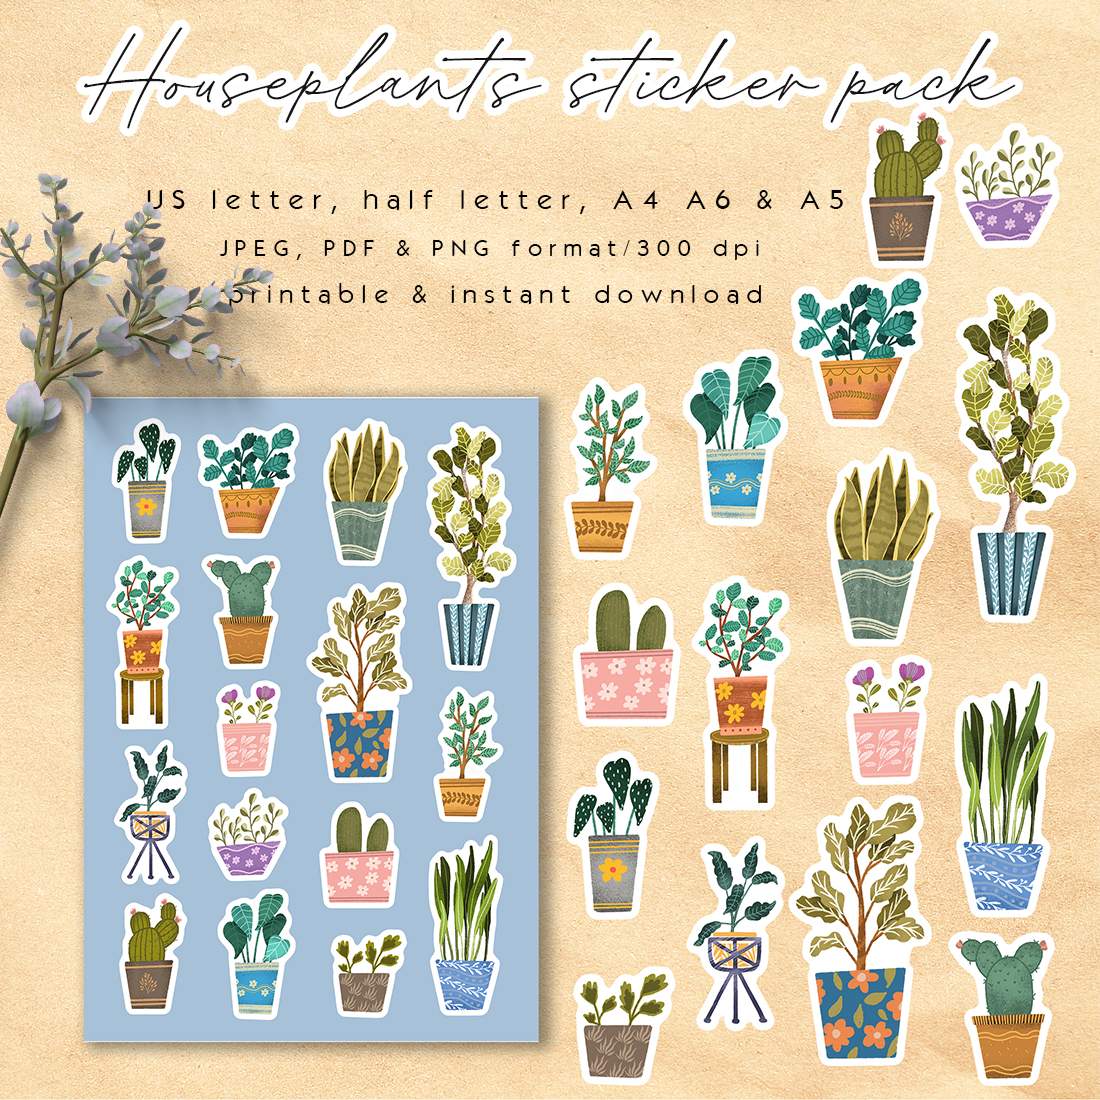 Cute Plants Stickers Pack